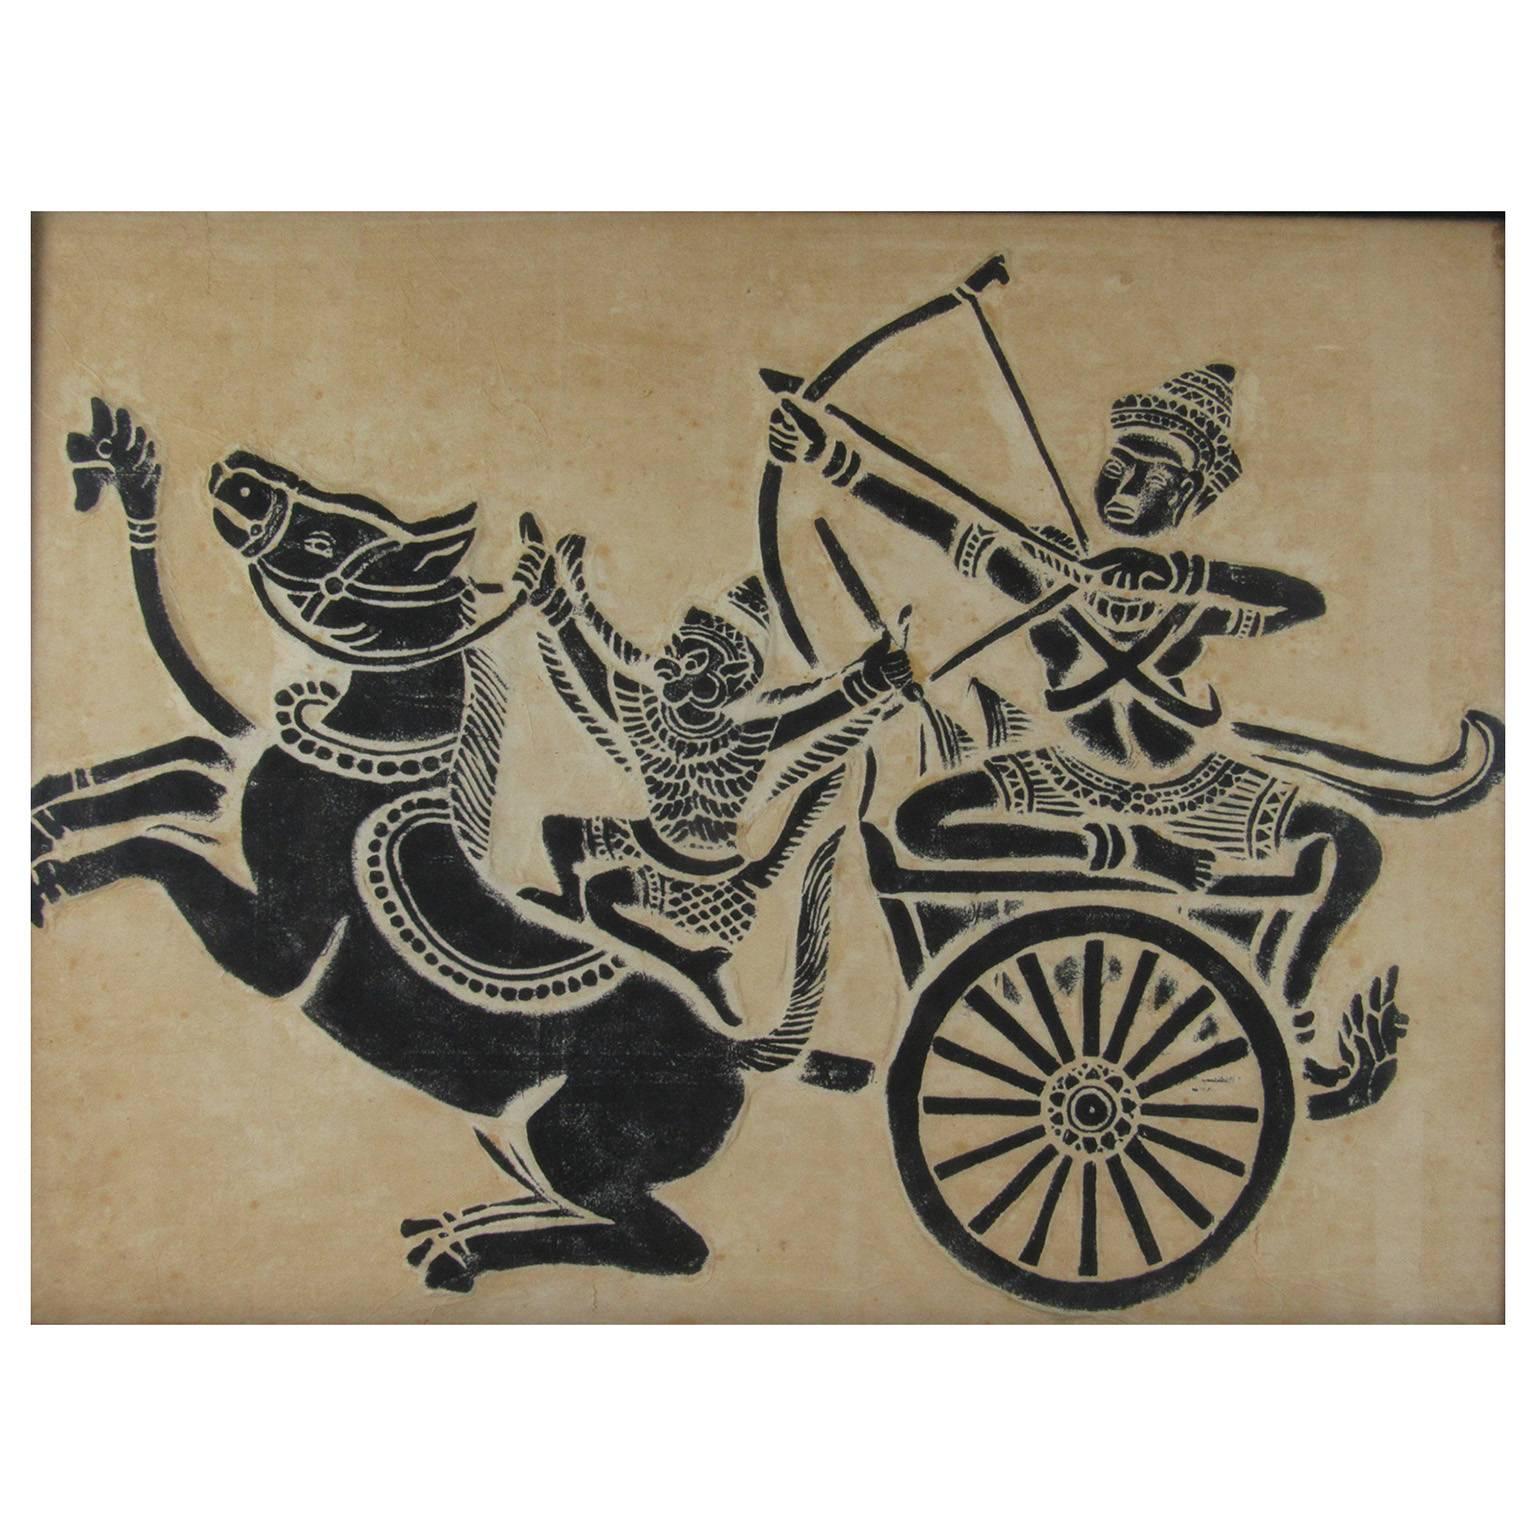 Thai temple rubbing on handmade paper depicting warriors in a chariot. Bears 